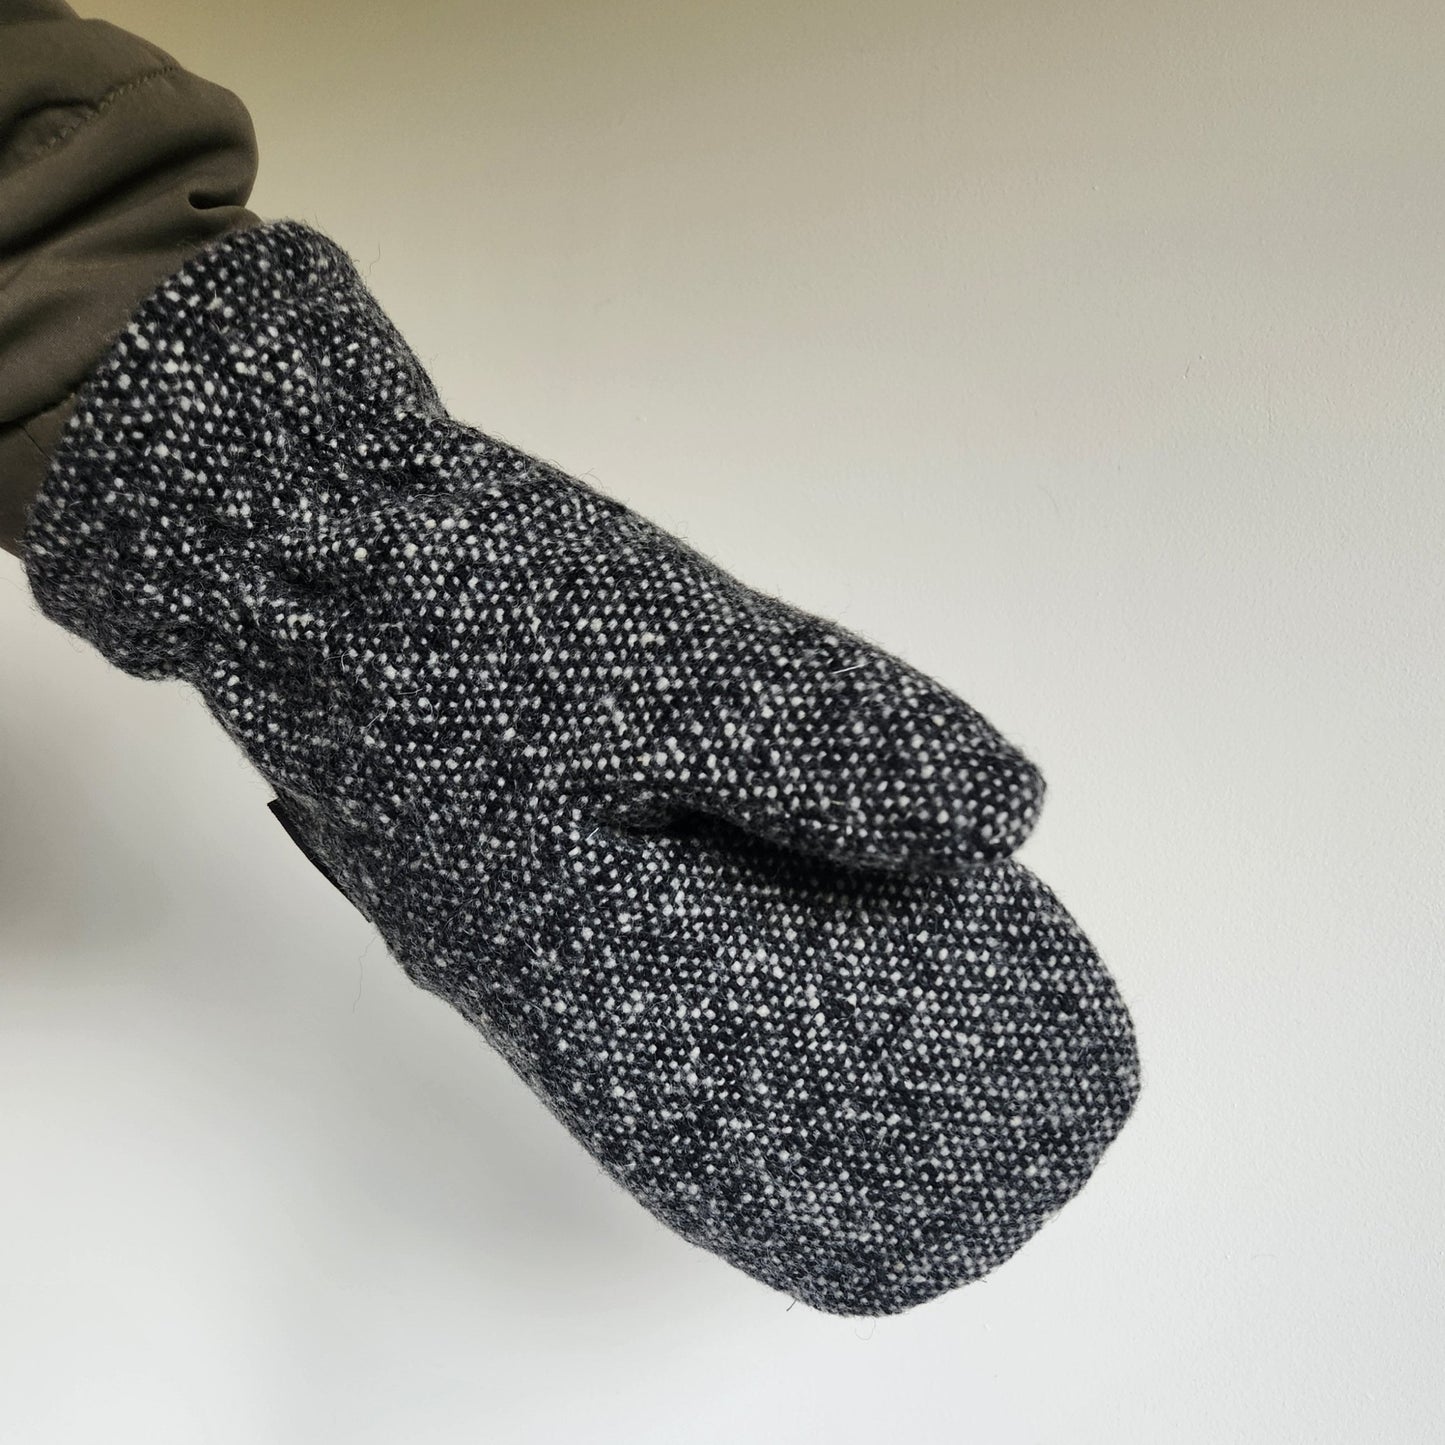 Wool Mittens Charcoal Woven-Large